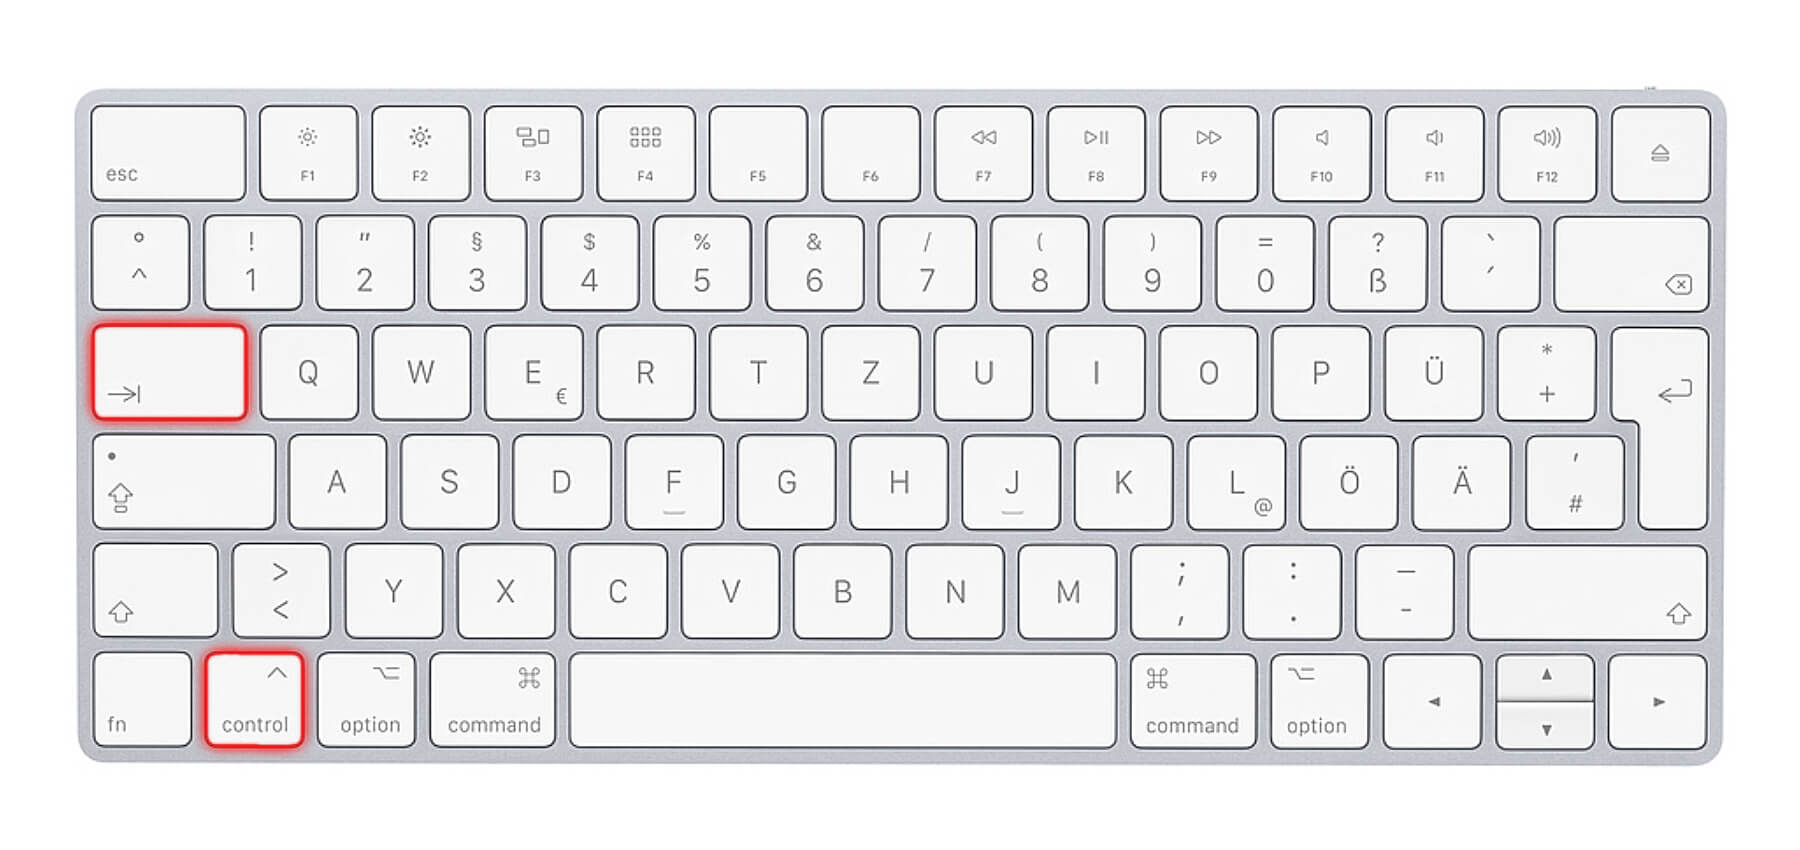 keyboard shortcuts for switching tabs in chrome on mac